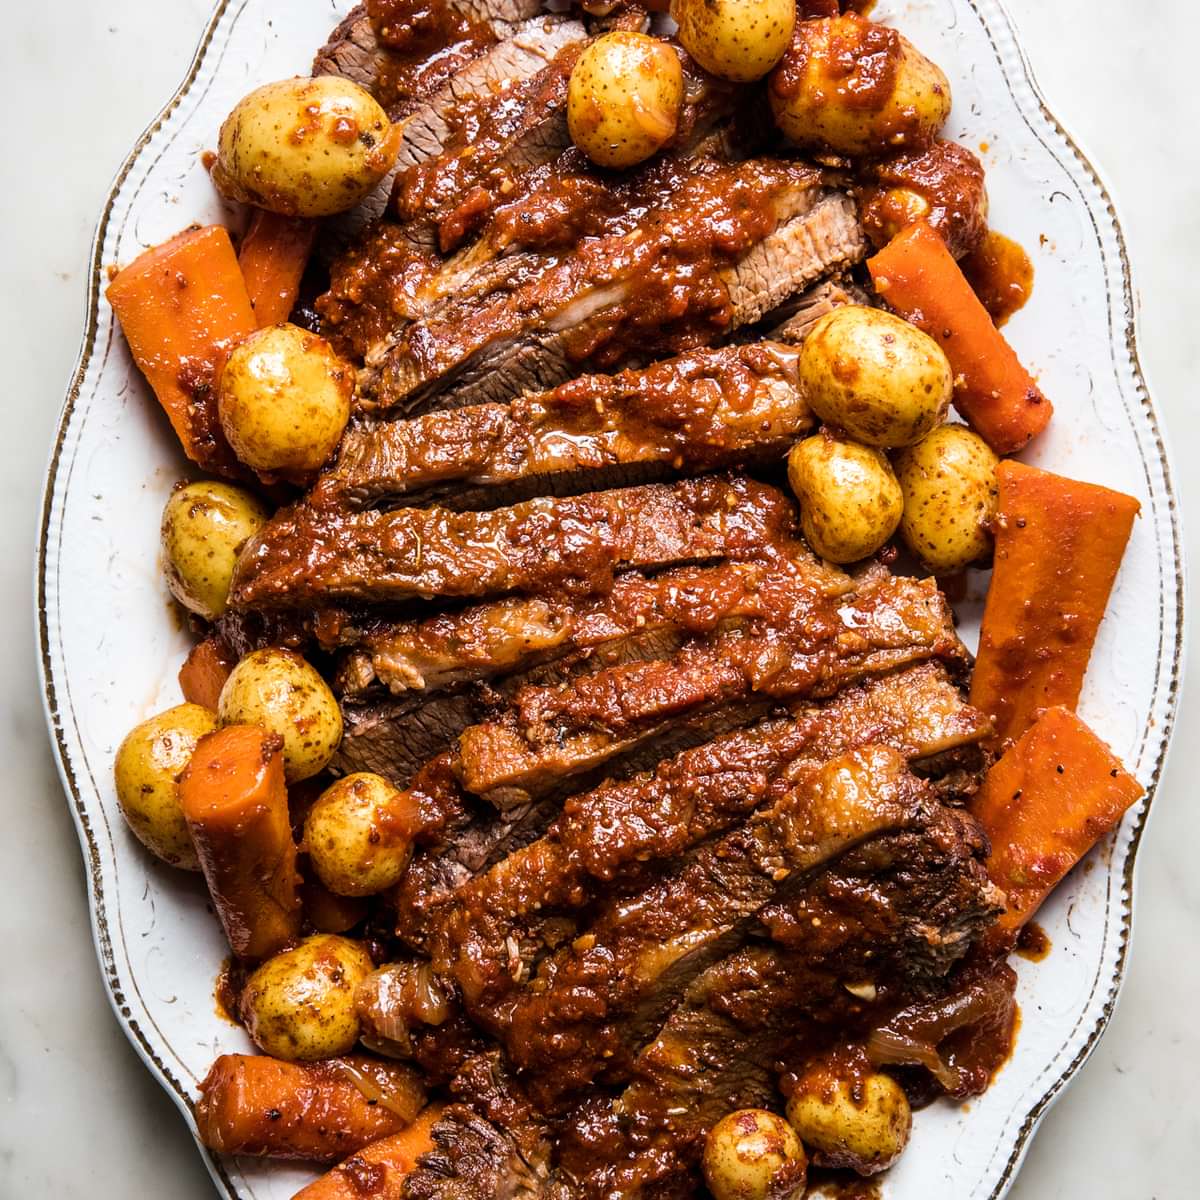 homemade braised brisket sliced on a serving platter nestled with carrots and potatoes